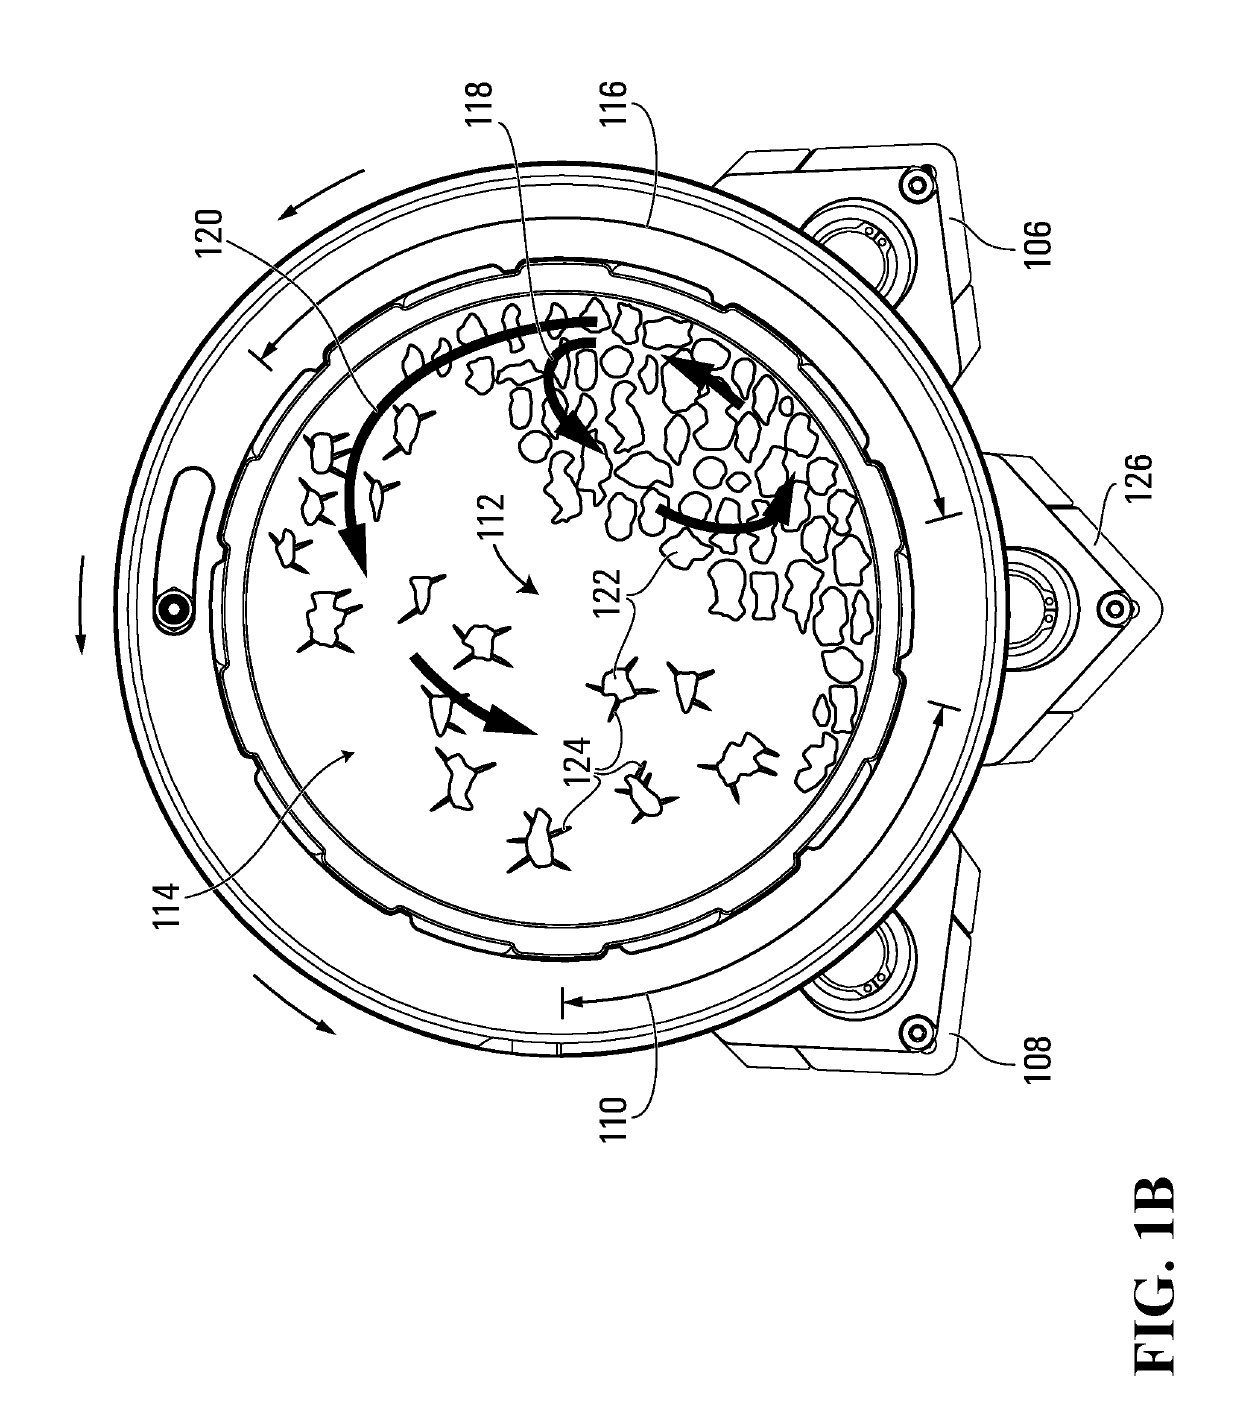 Plant trimming apparatus and methods